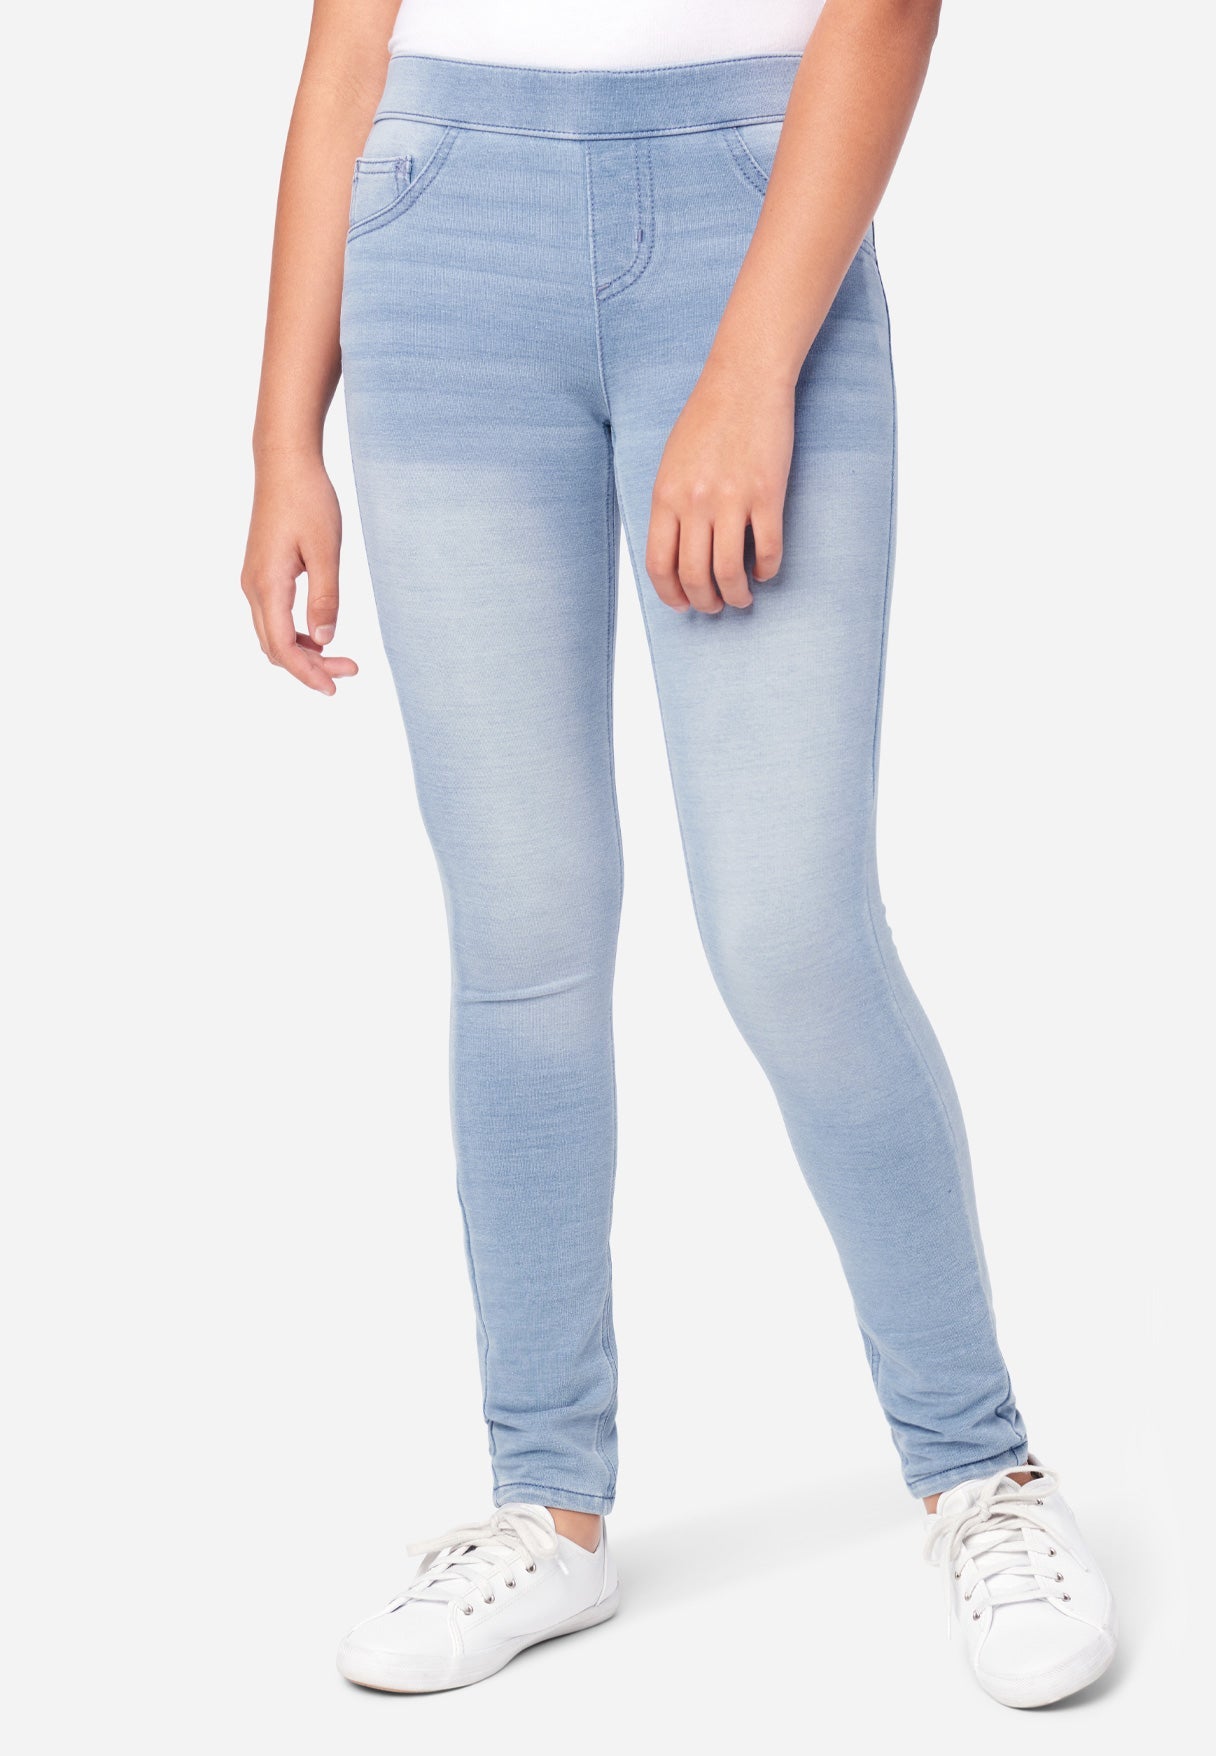 Natural Reflections Lucy Pull-On Denim Jeggings for Ladies - Rinse